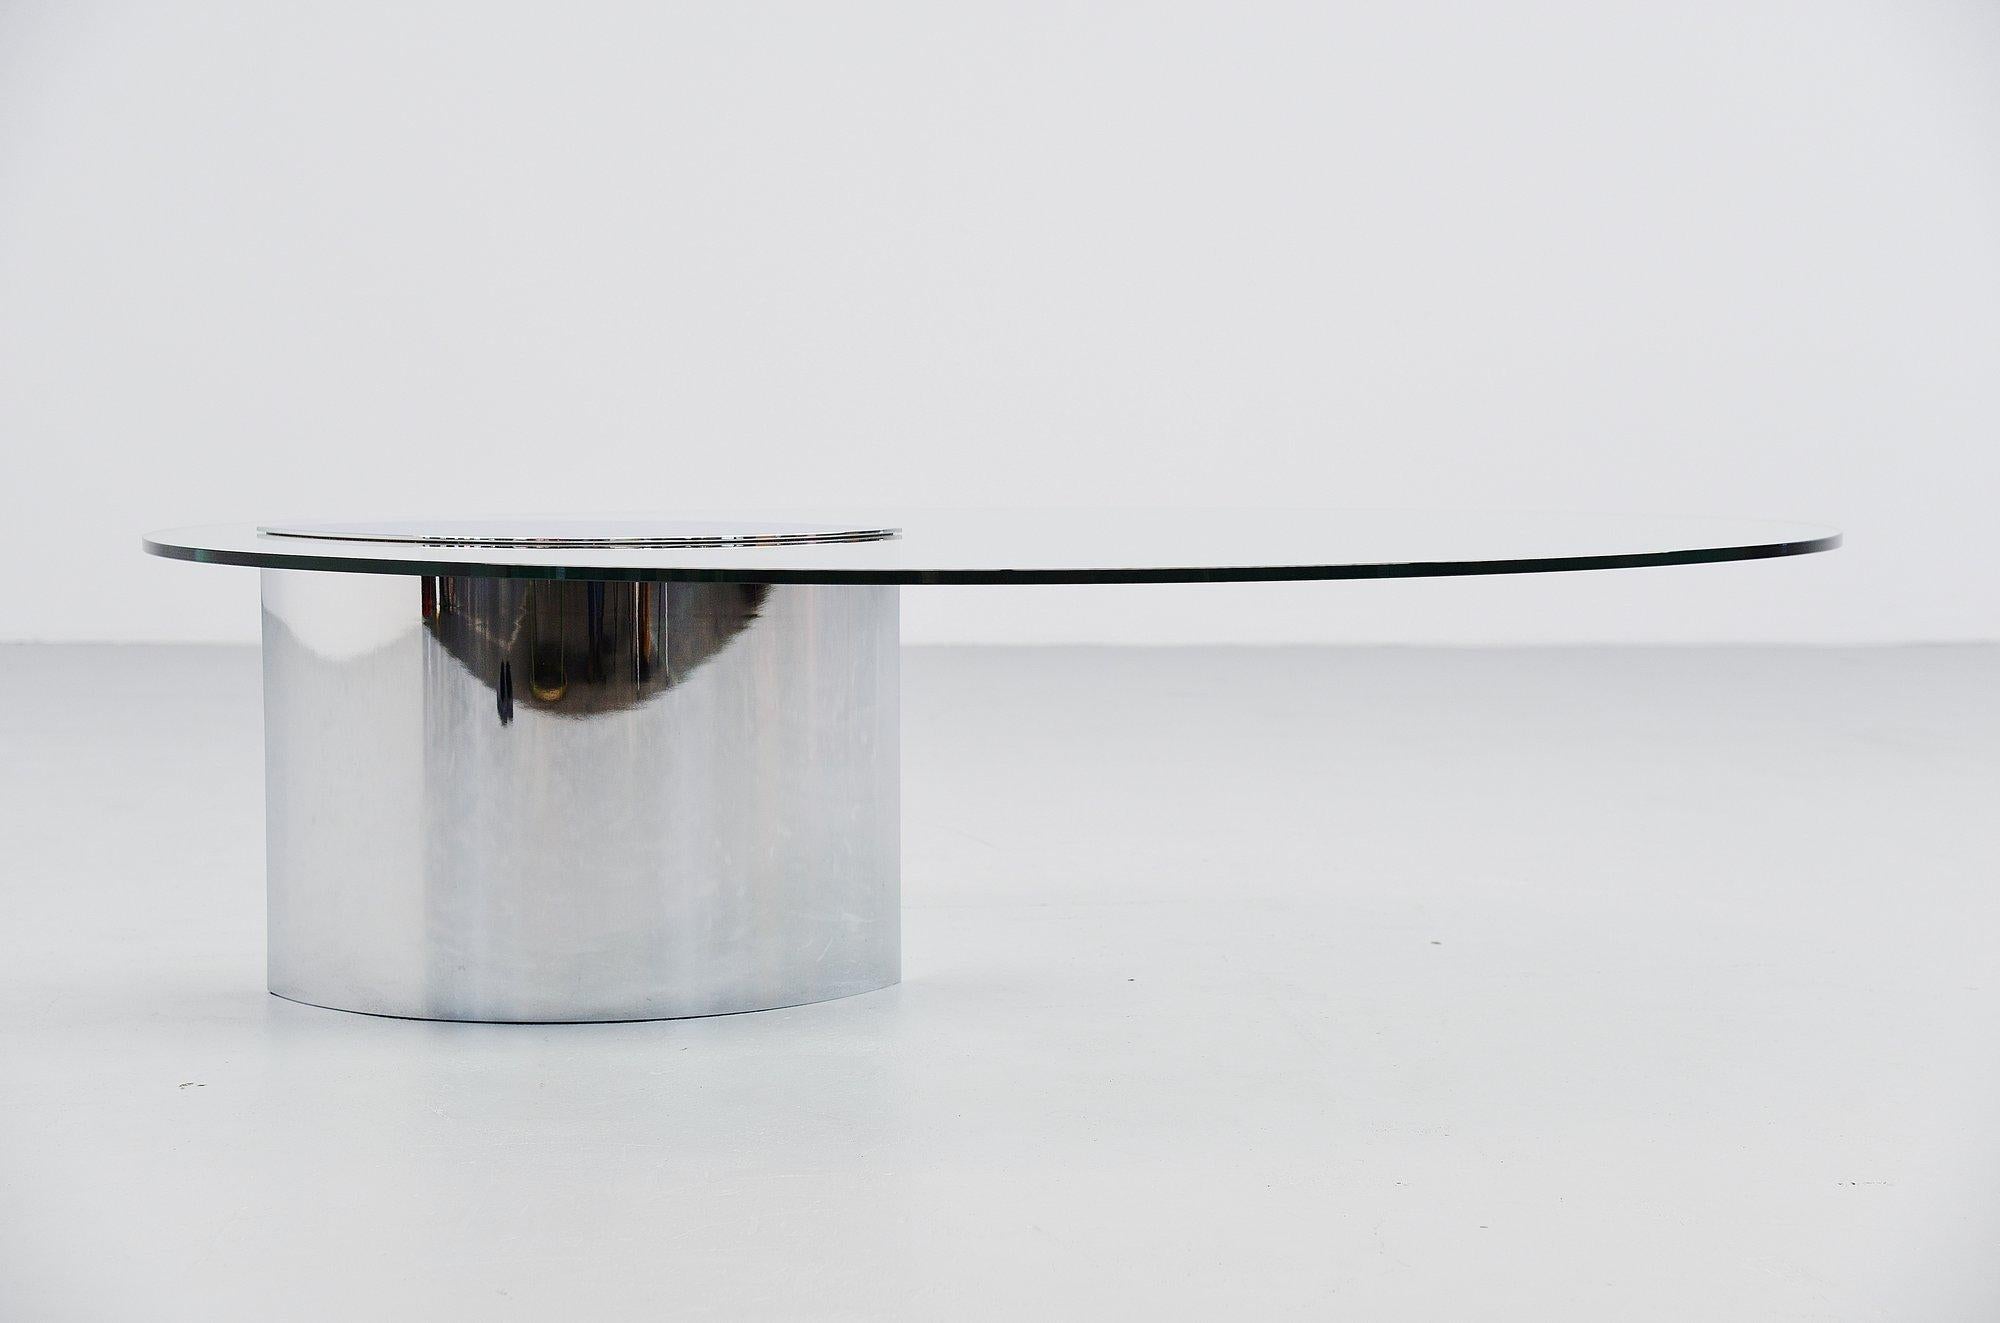 Very imposing Lunario low coffee table designed by Cini Boeri and manufactured by Gavina, Italy 1970. This early table has a chrome plated weighted base and an oval hardend glass top. The table is in very good original condition without any damages